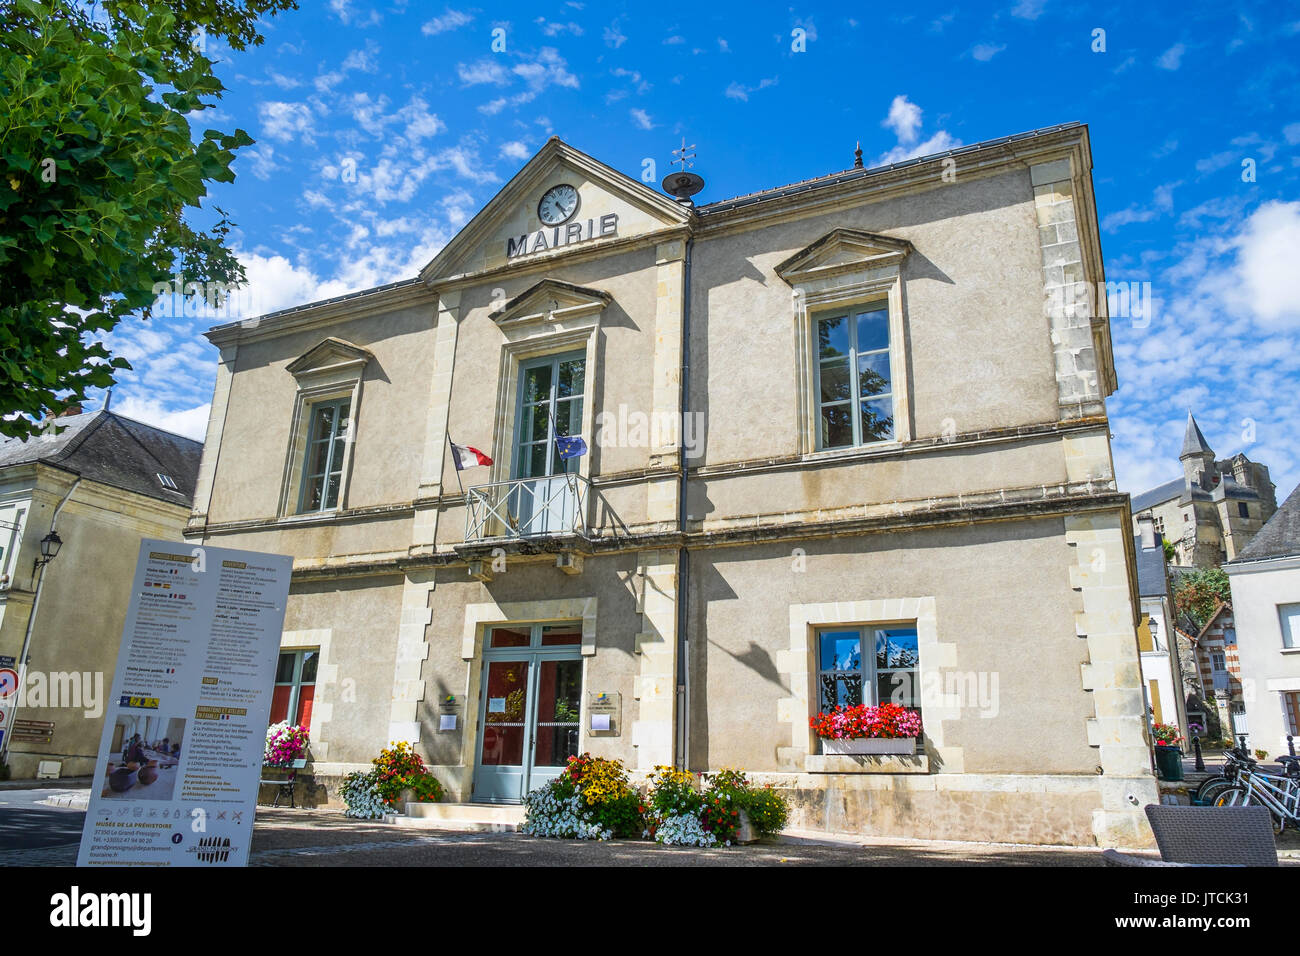 Mairie (town hall), Le Grande Pressigny, France. Stock Photo